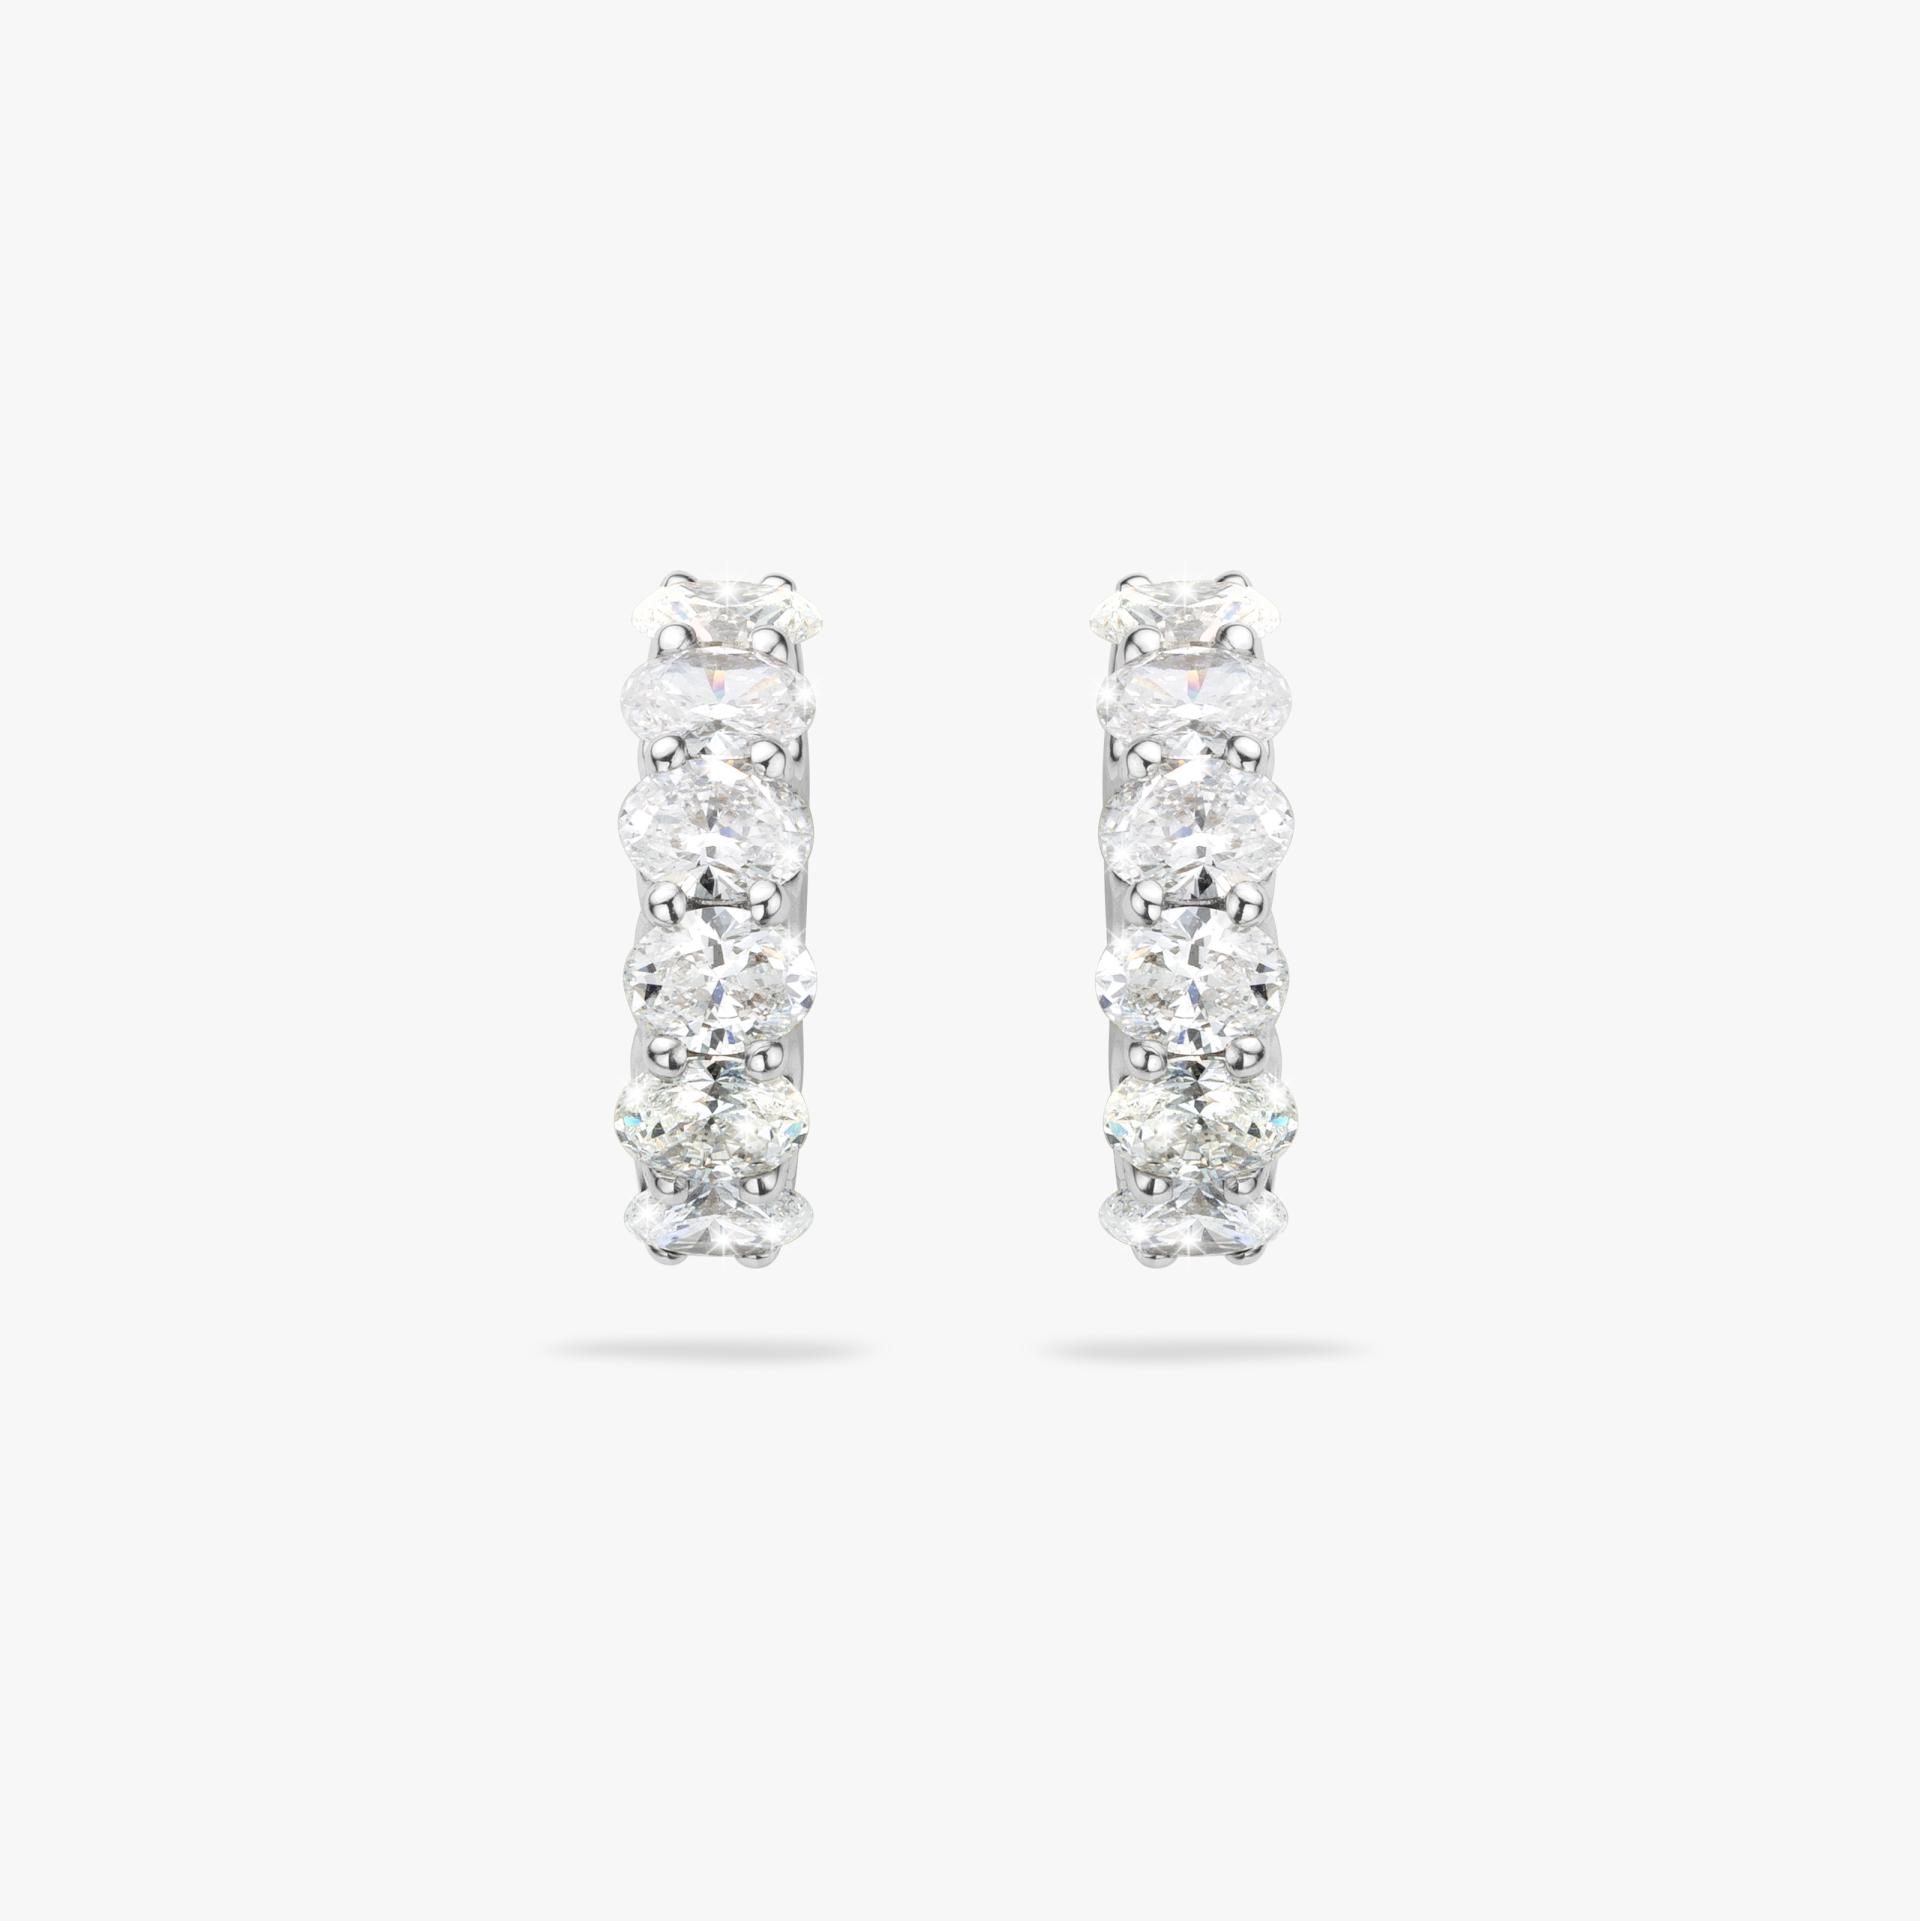 White gold earrings set with oval shaped diamonds made by Maison De Greef